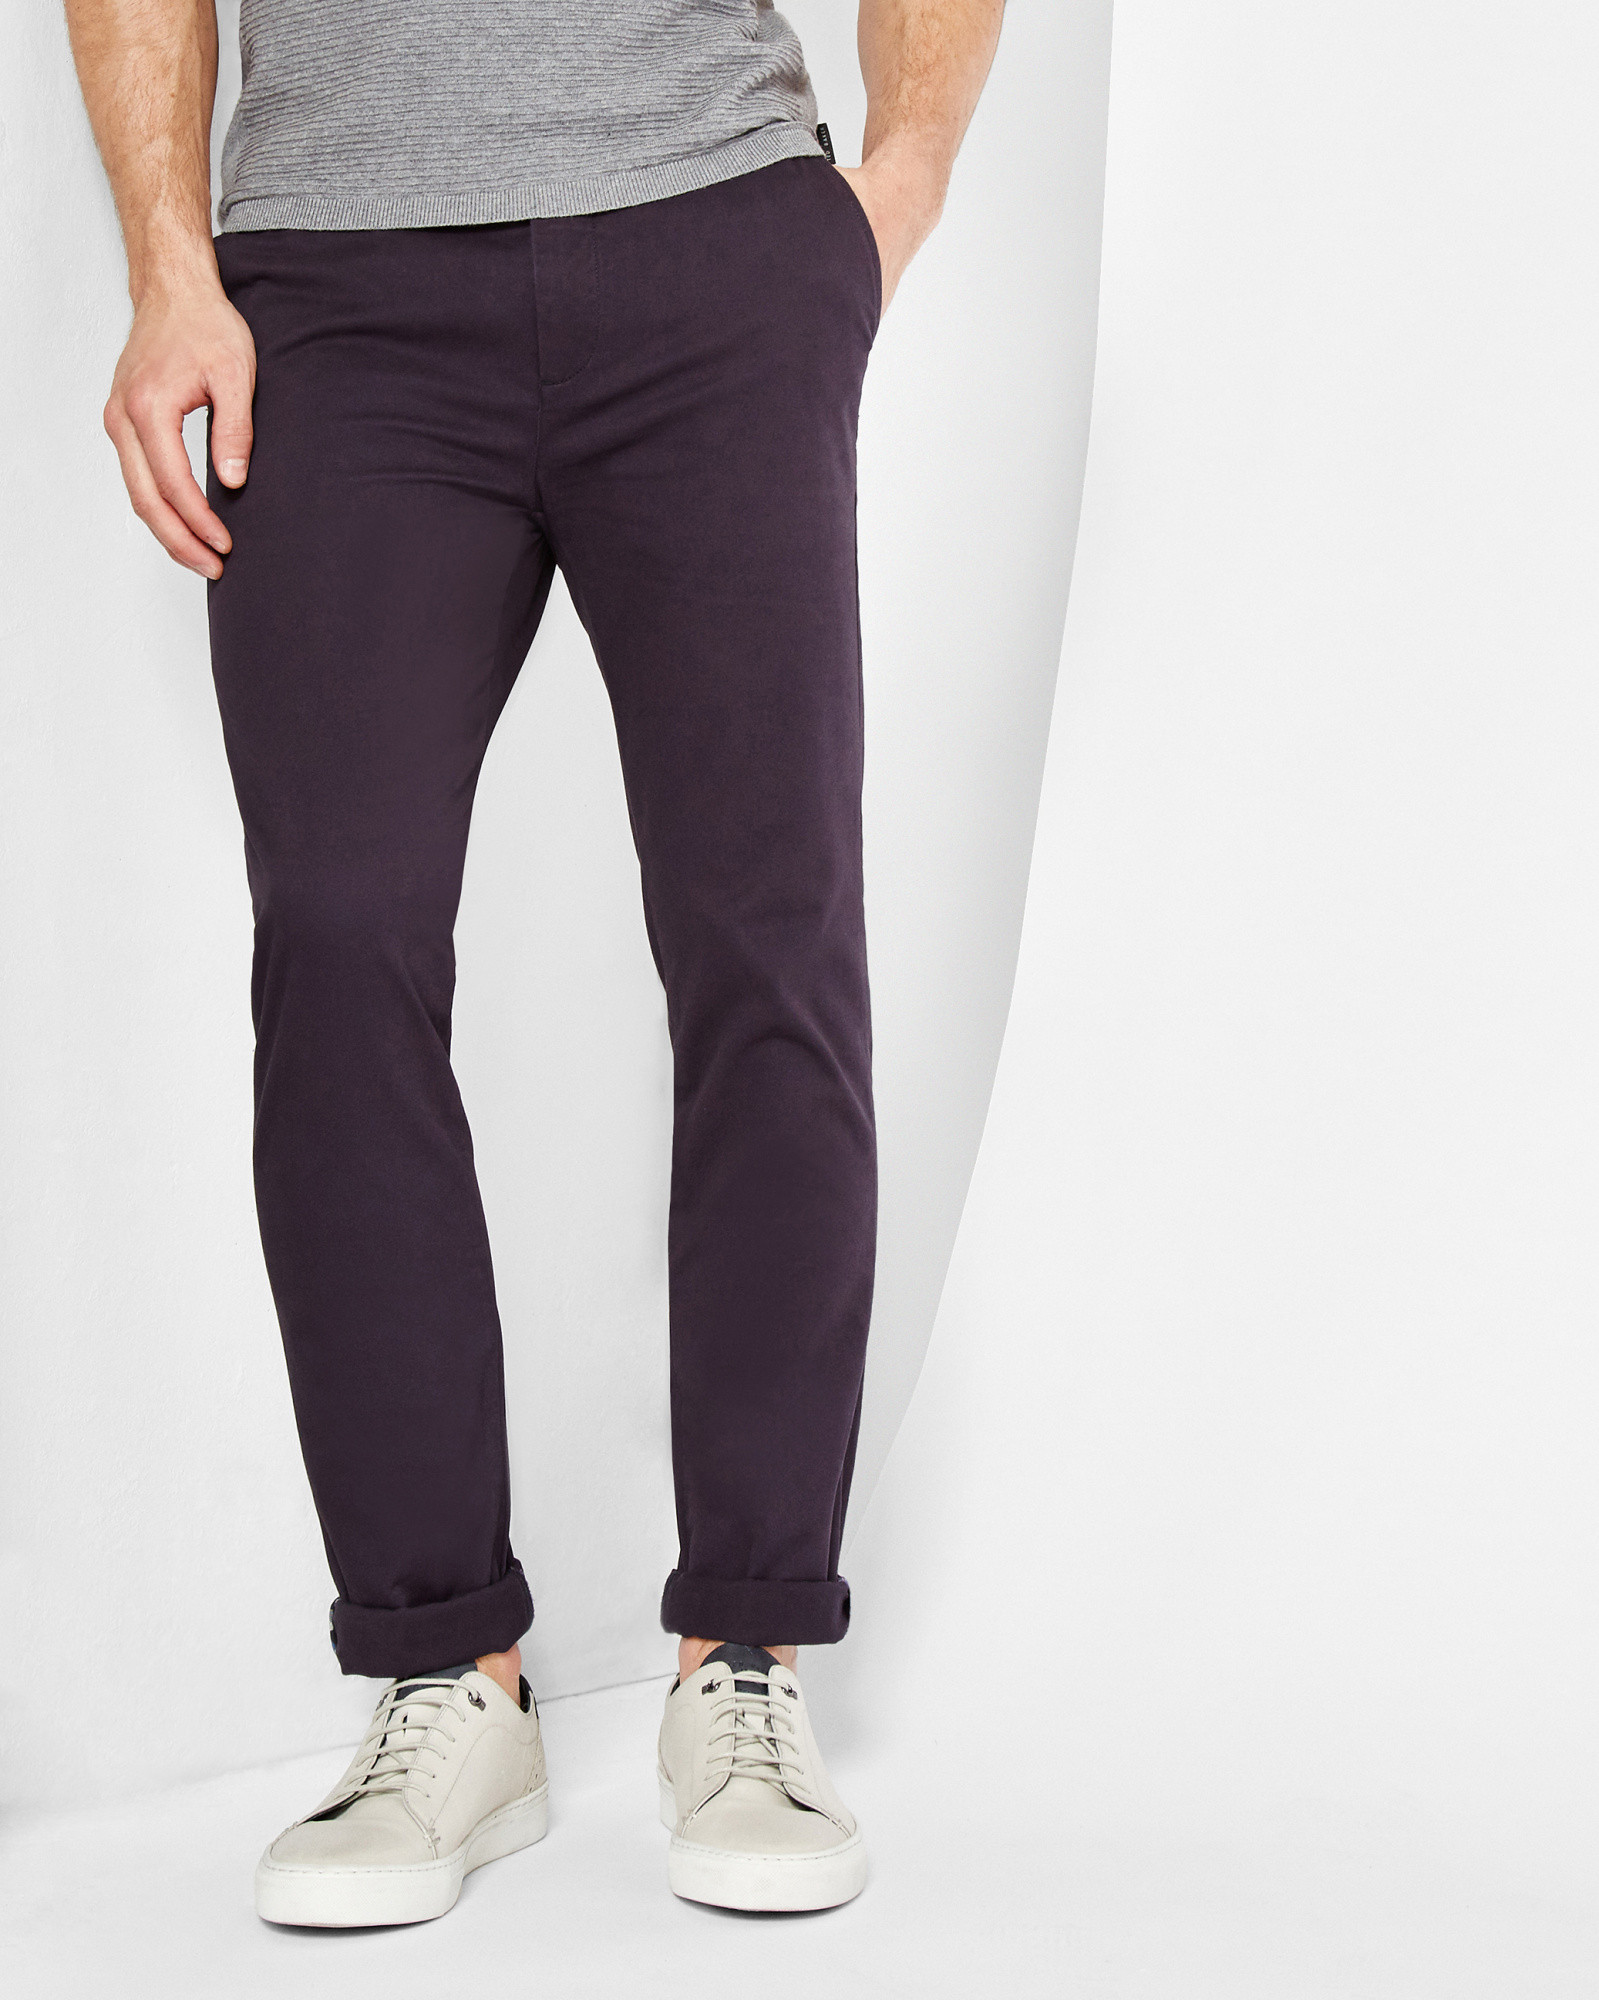 TAPCOR Tapered fit cotton chinos